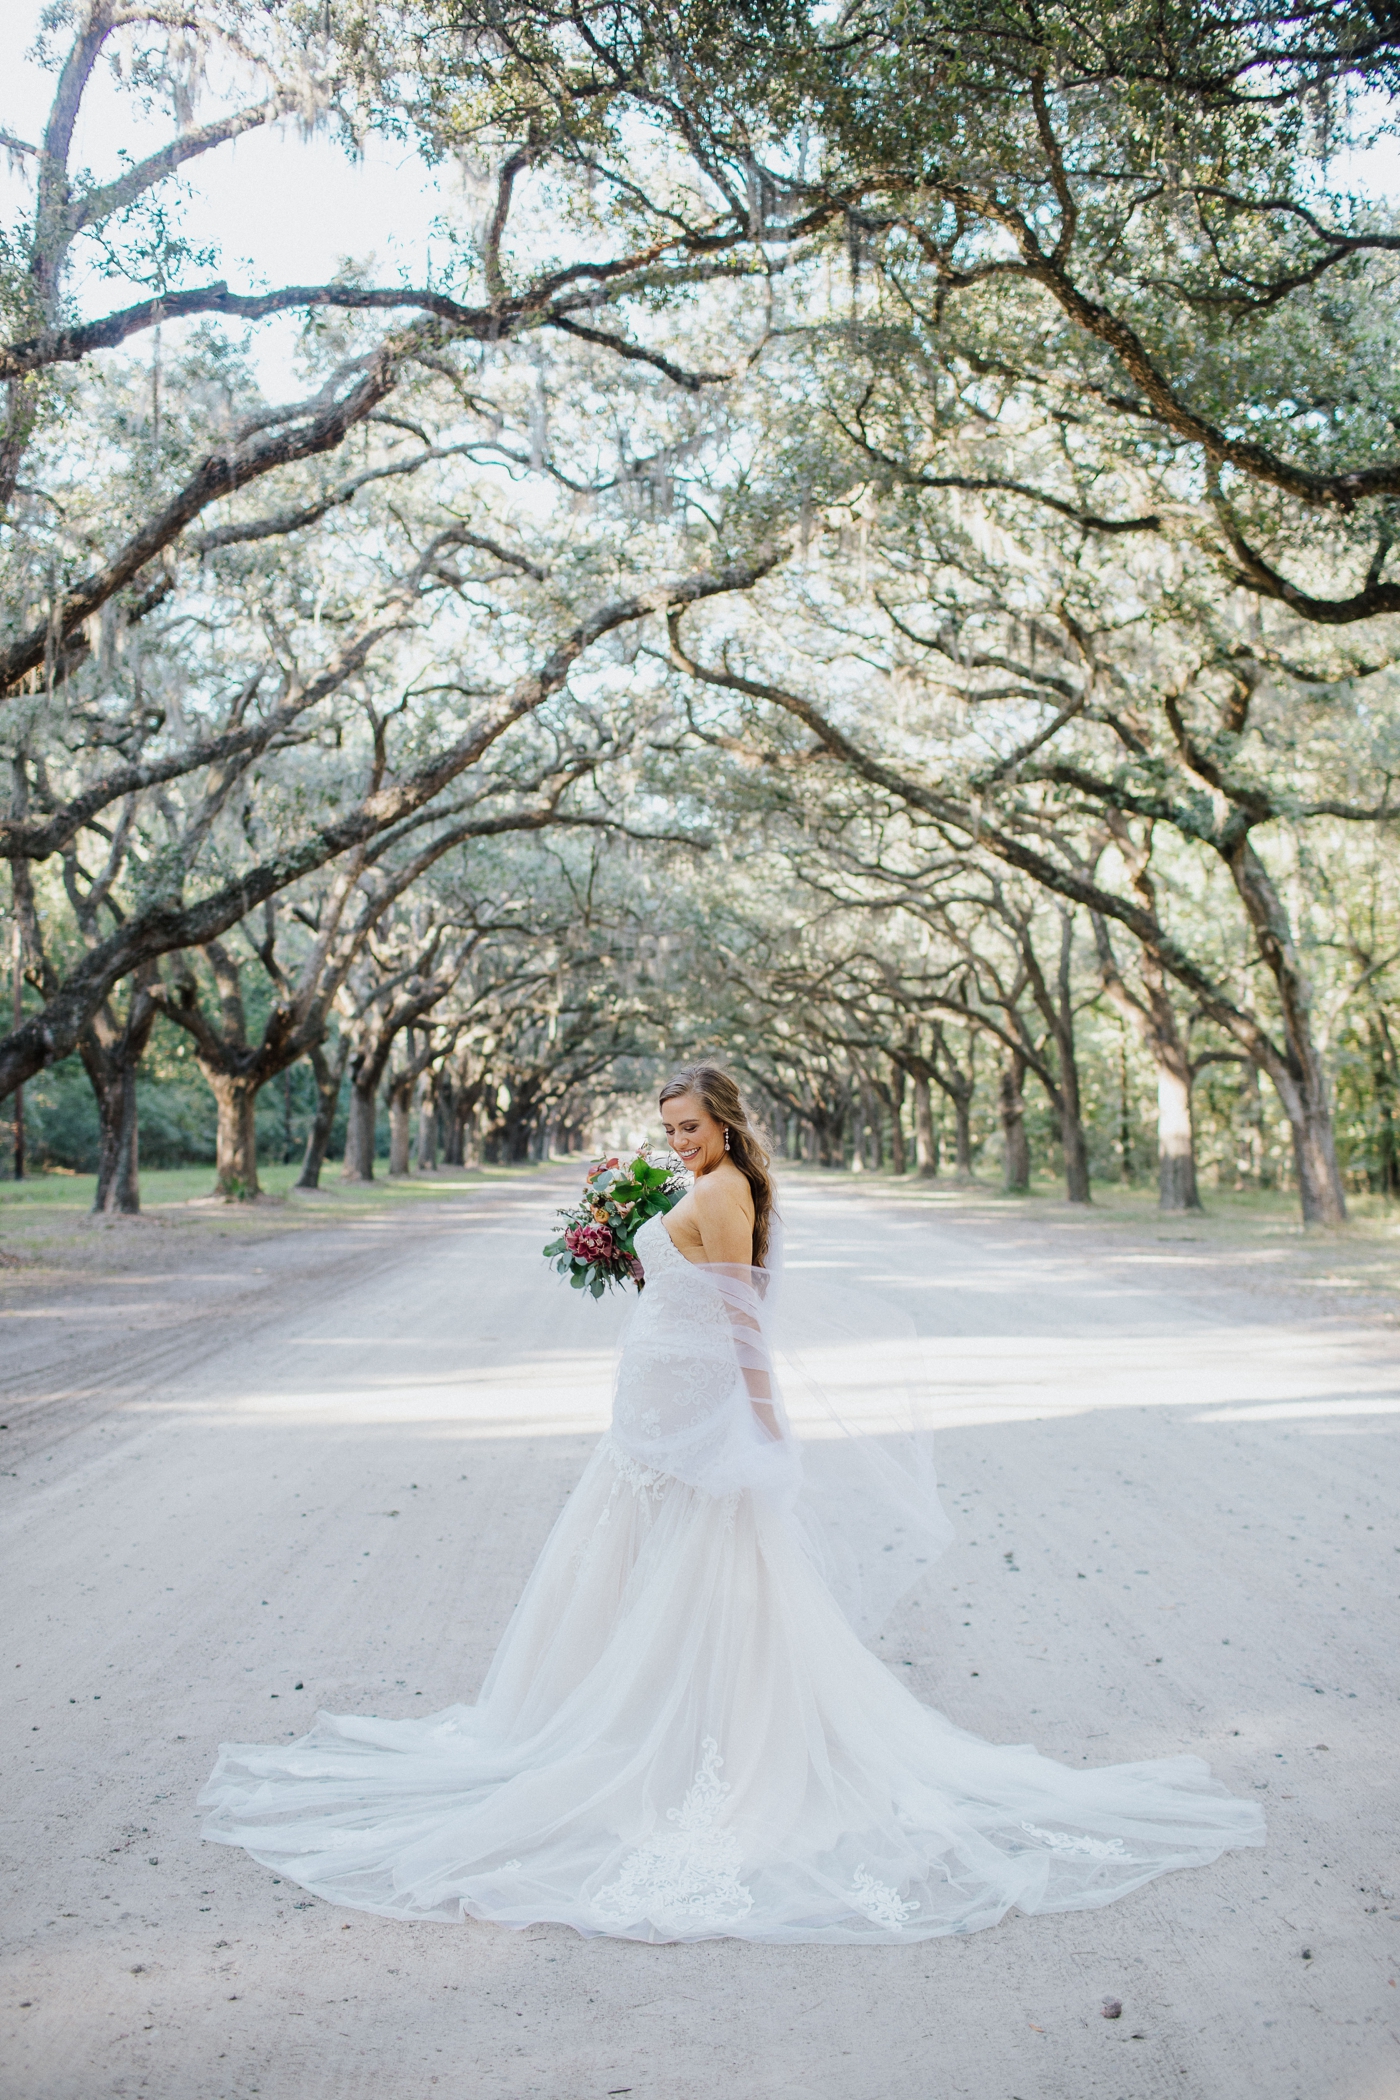 Ashley’s bridal portraits at Wormsloe | Izzy and Co.